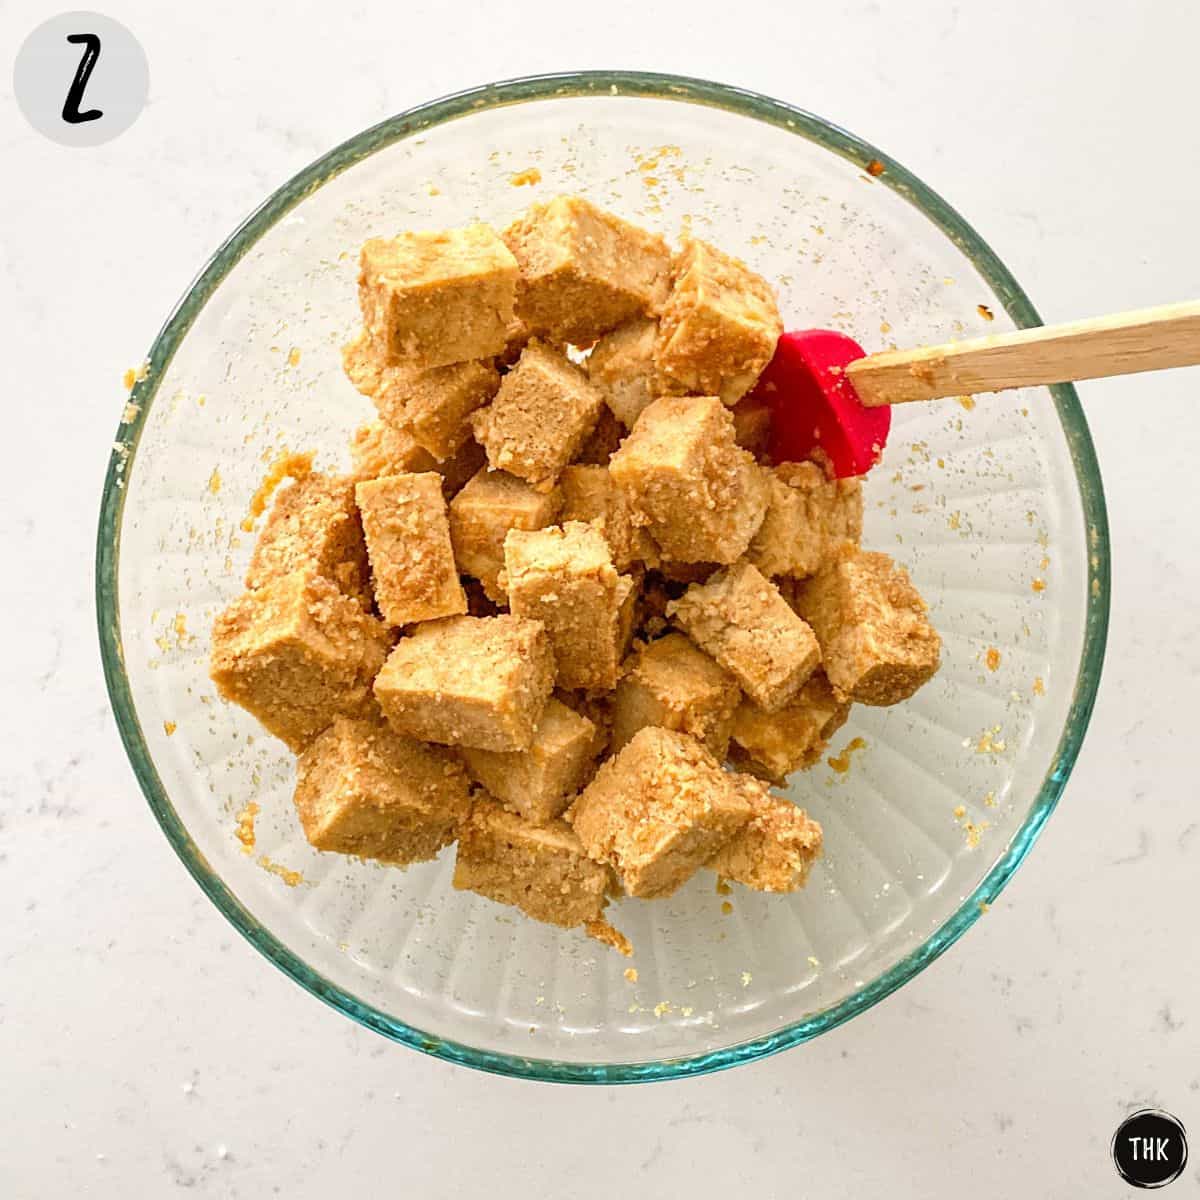 Tofu cubes in glass bowl with soy sauce and seasoning.